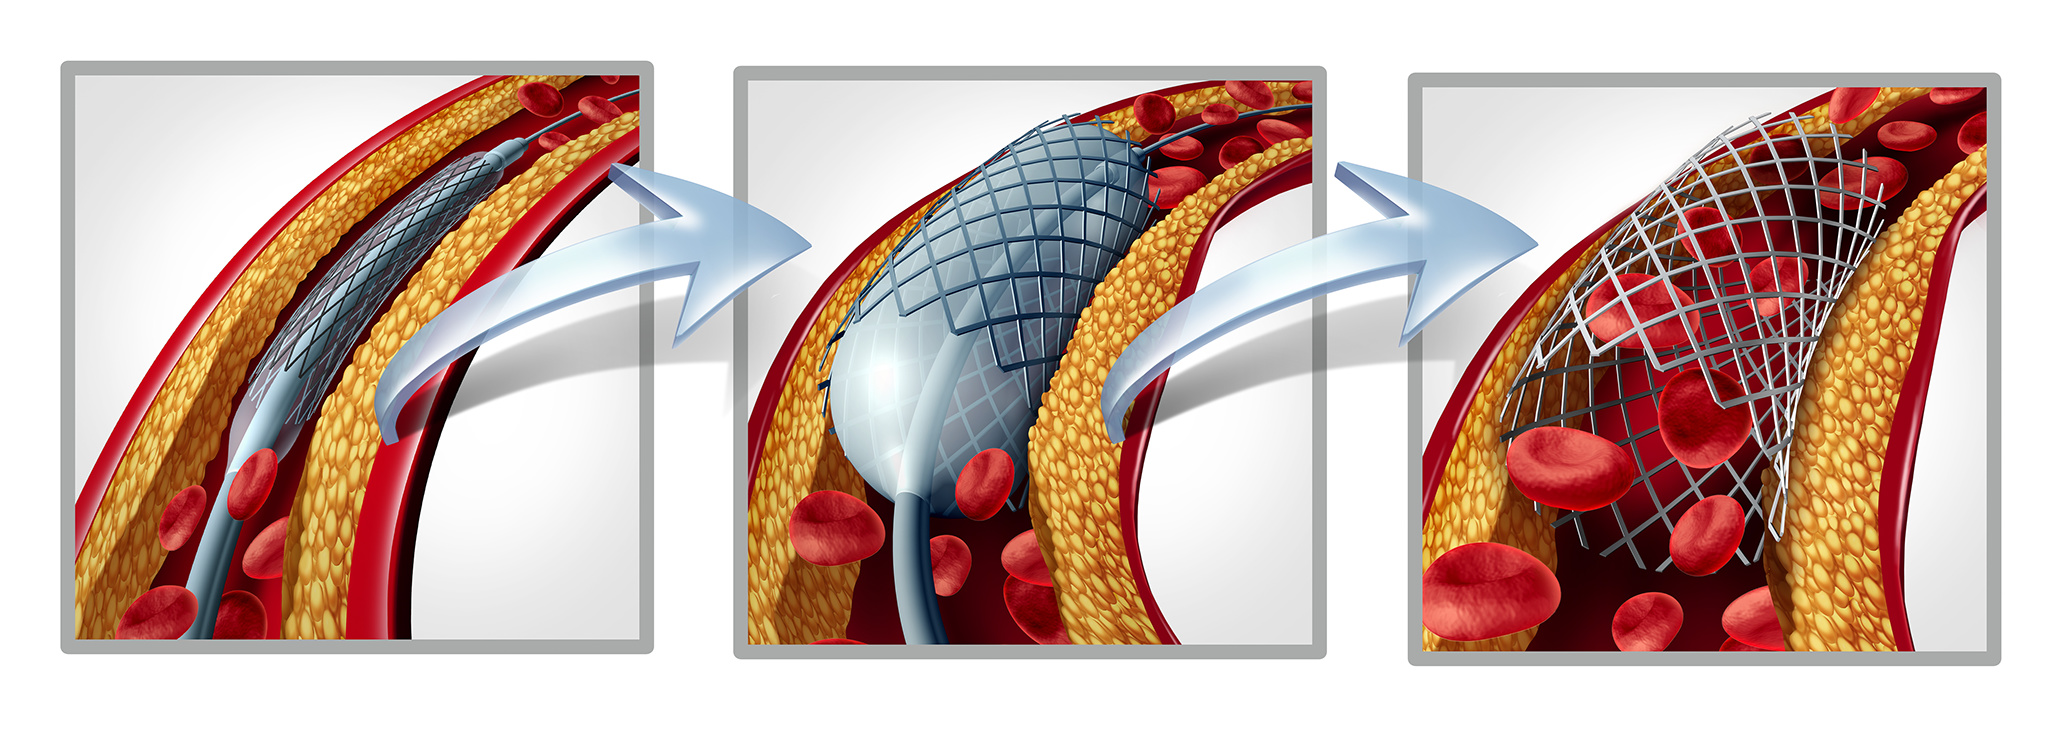 Coronary stent and angioplasty concept as a heart disease treatment symbol diagram with the stages of an implant procedure in an artery that has cholesterol plaque blockage being opened for increased blood flow as a 3D illustration.